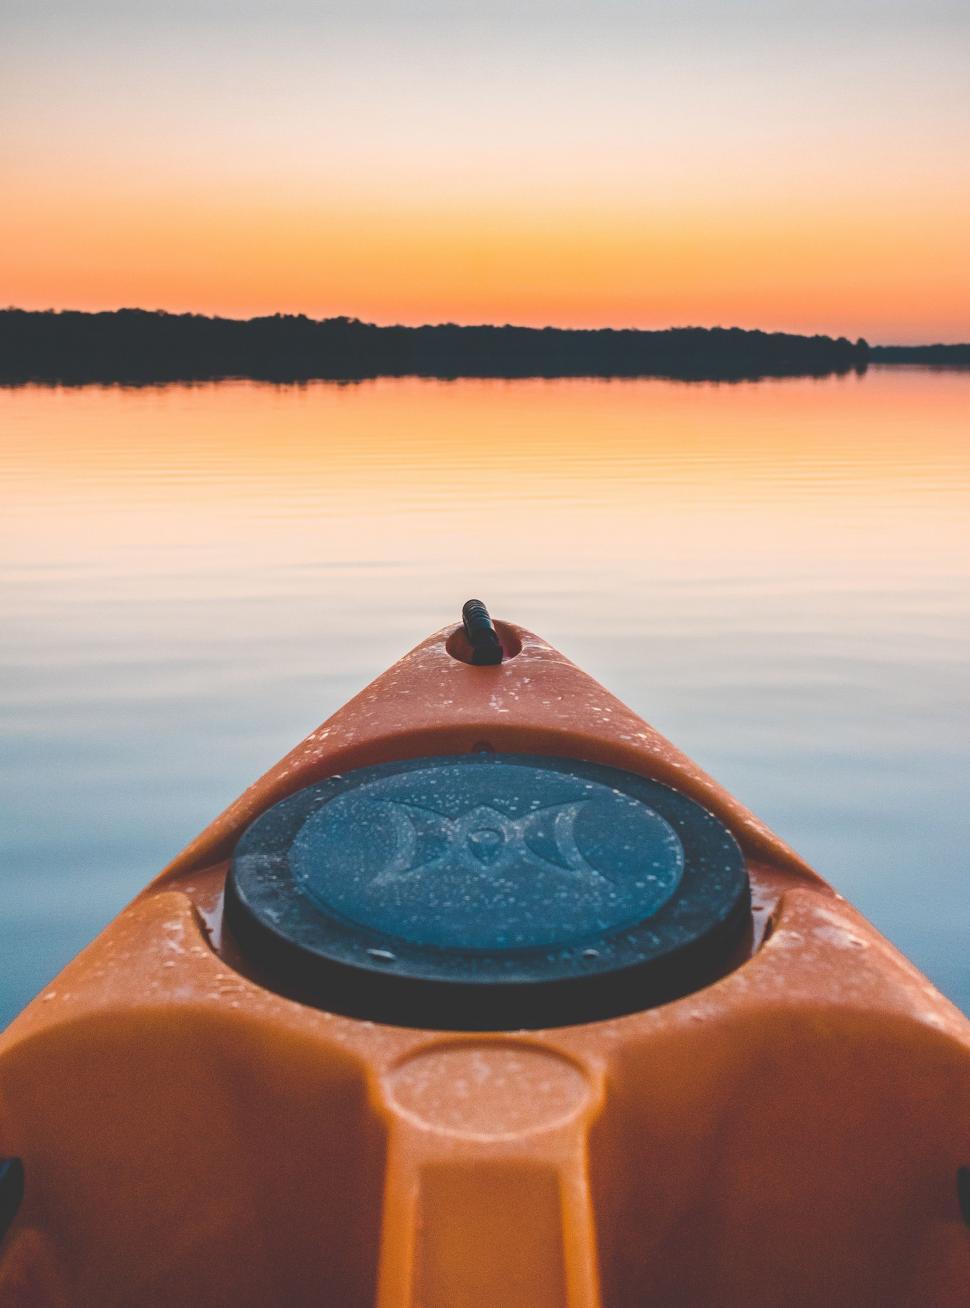 Free Image of Paddling in a Kayak: A View of a Body of Water 